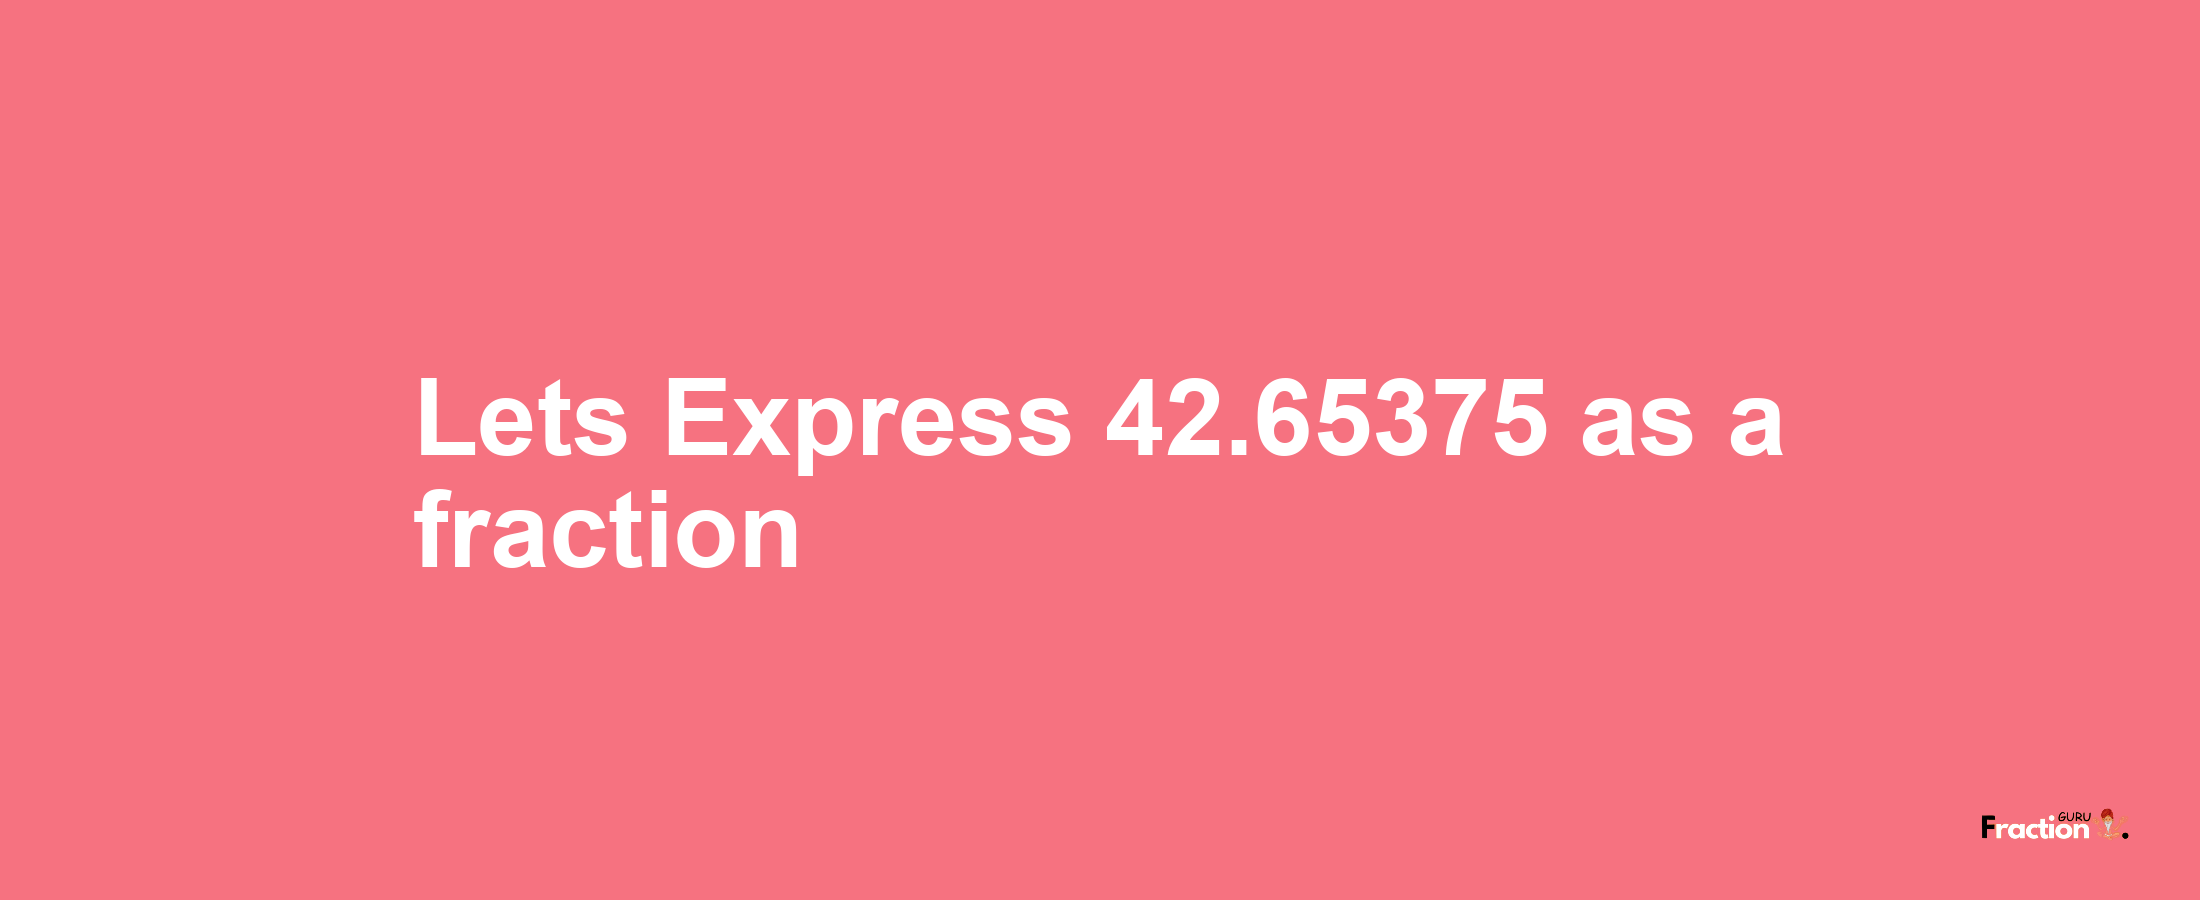 Lets Express 42.65375 as afraction